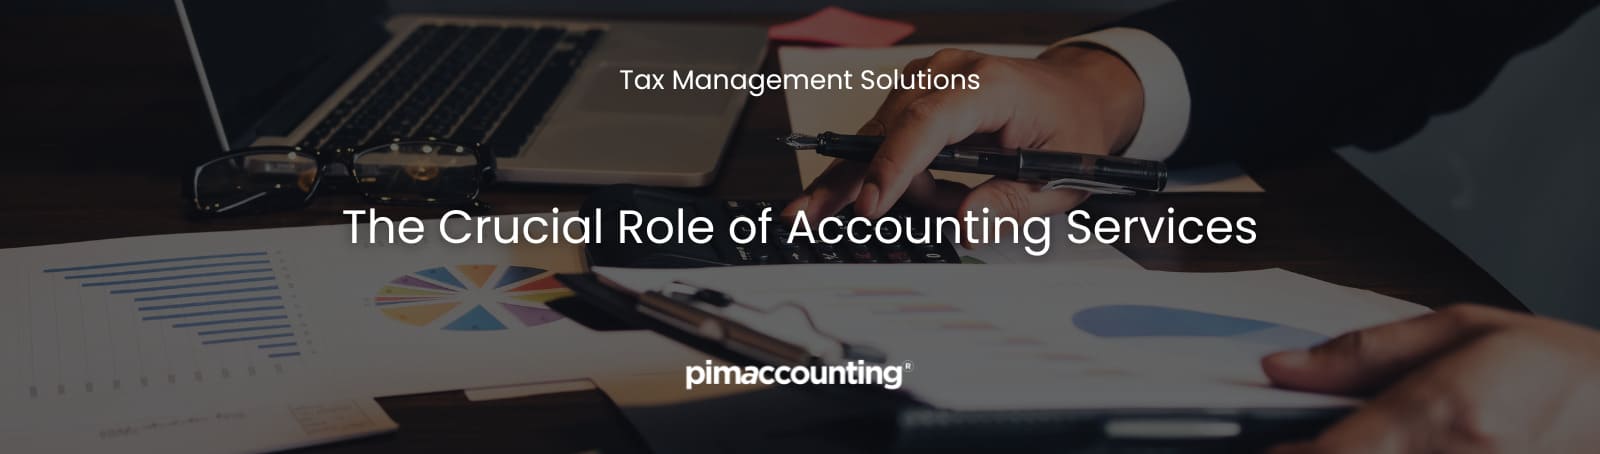 The Crucial Role of Accounting Services